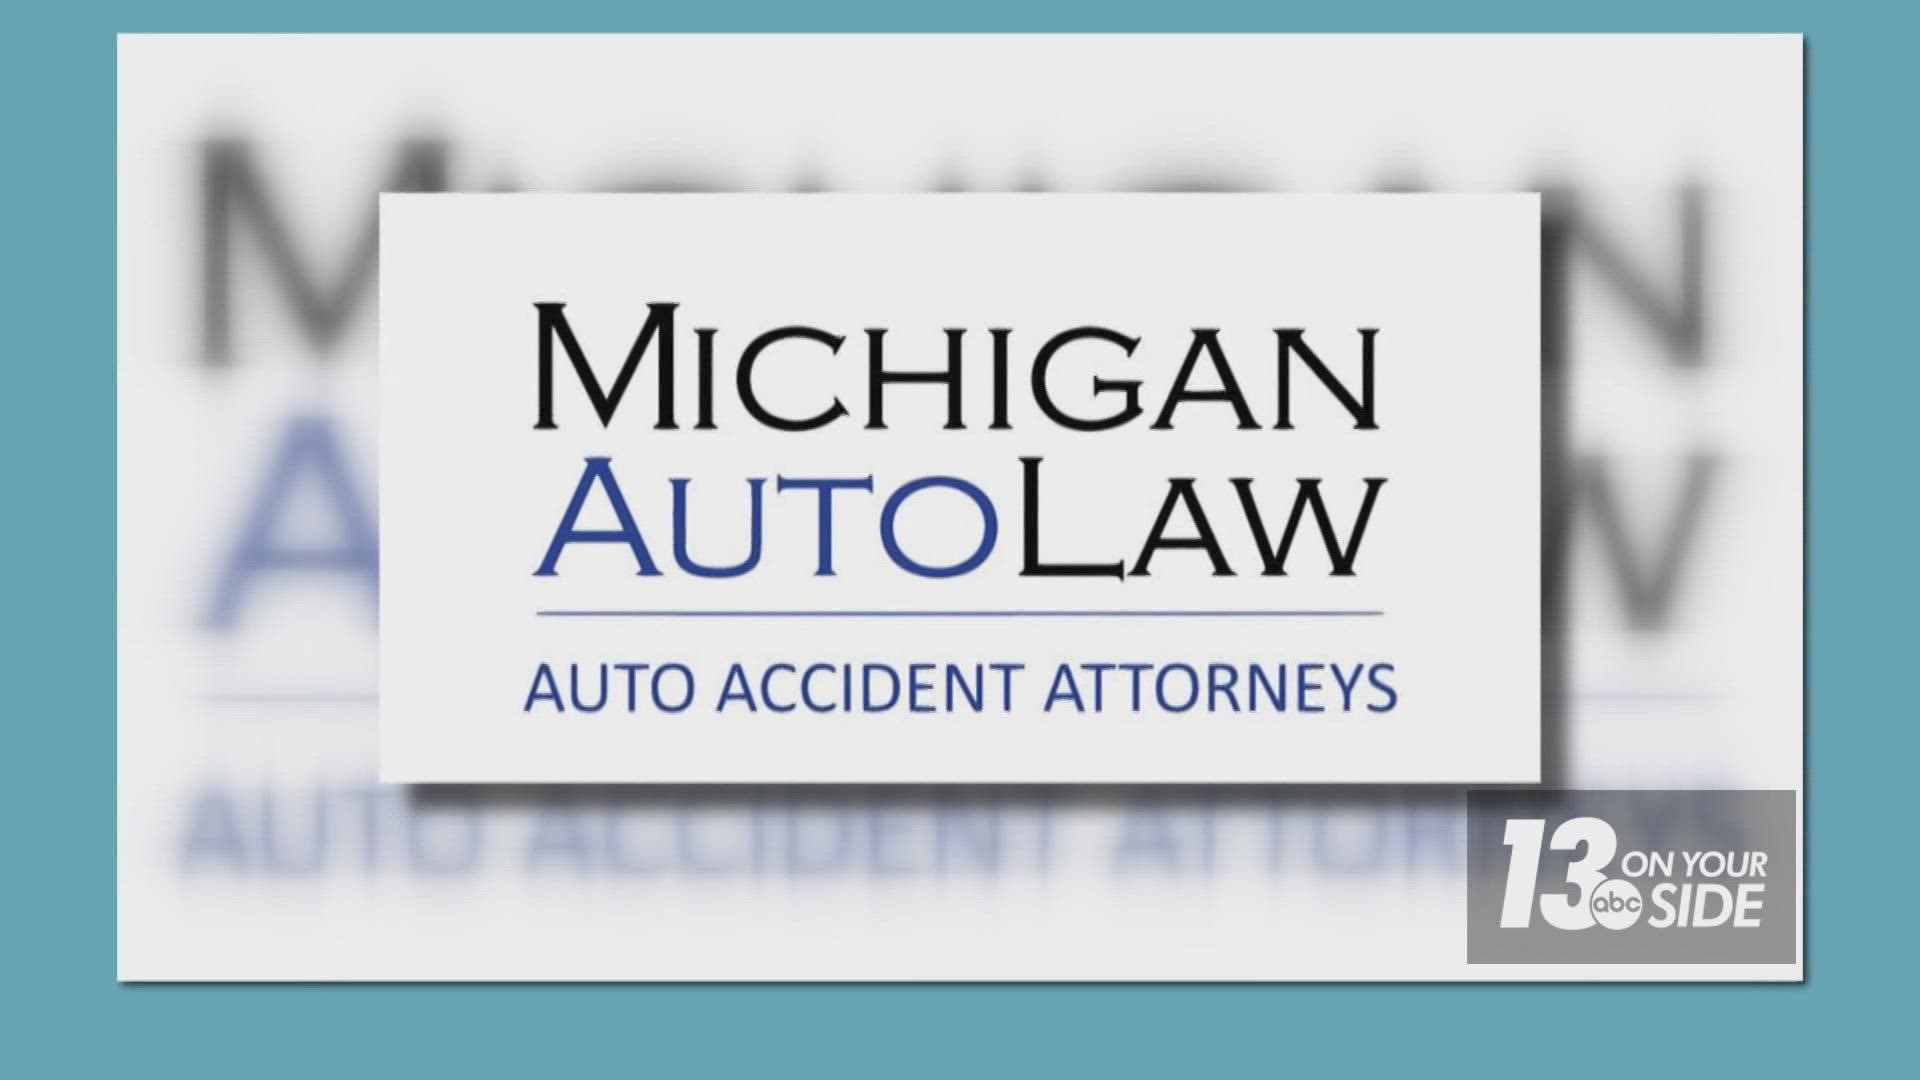 Brandon Hewitt is an attorney with Michigan Auto Law and he recommends full coverage for teenagers who drive their own cars or trucks.